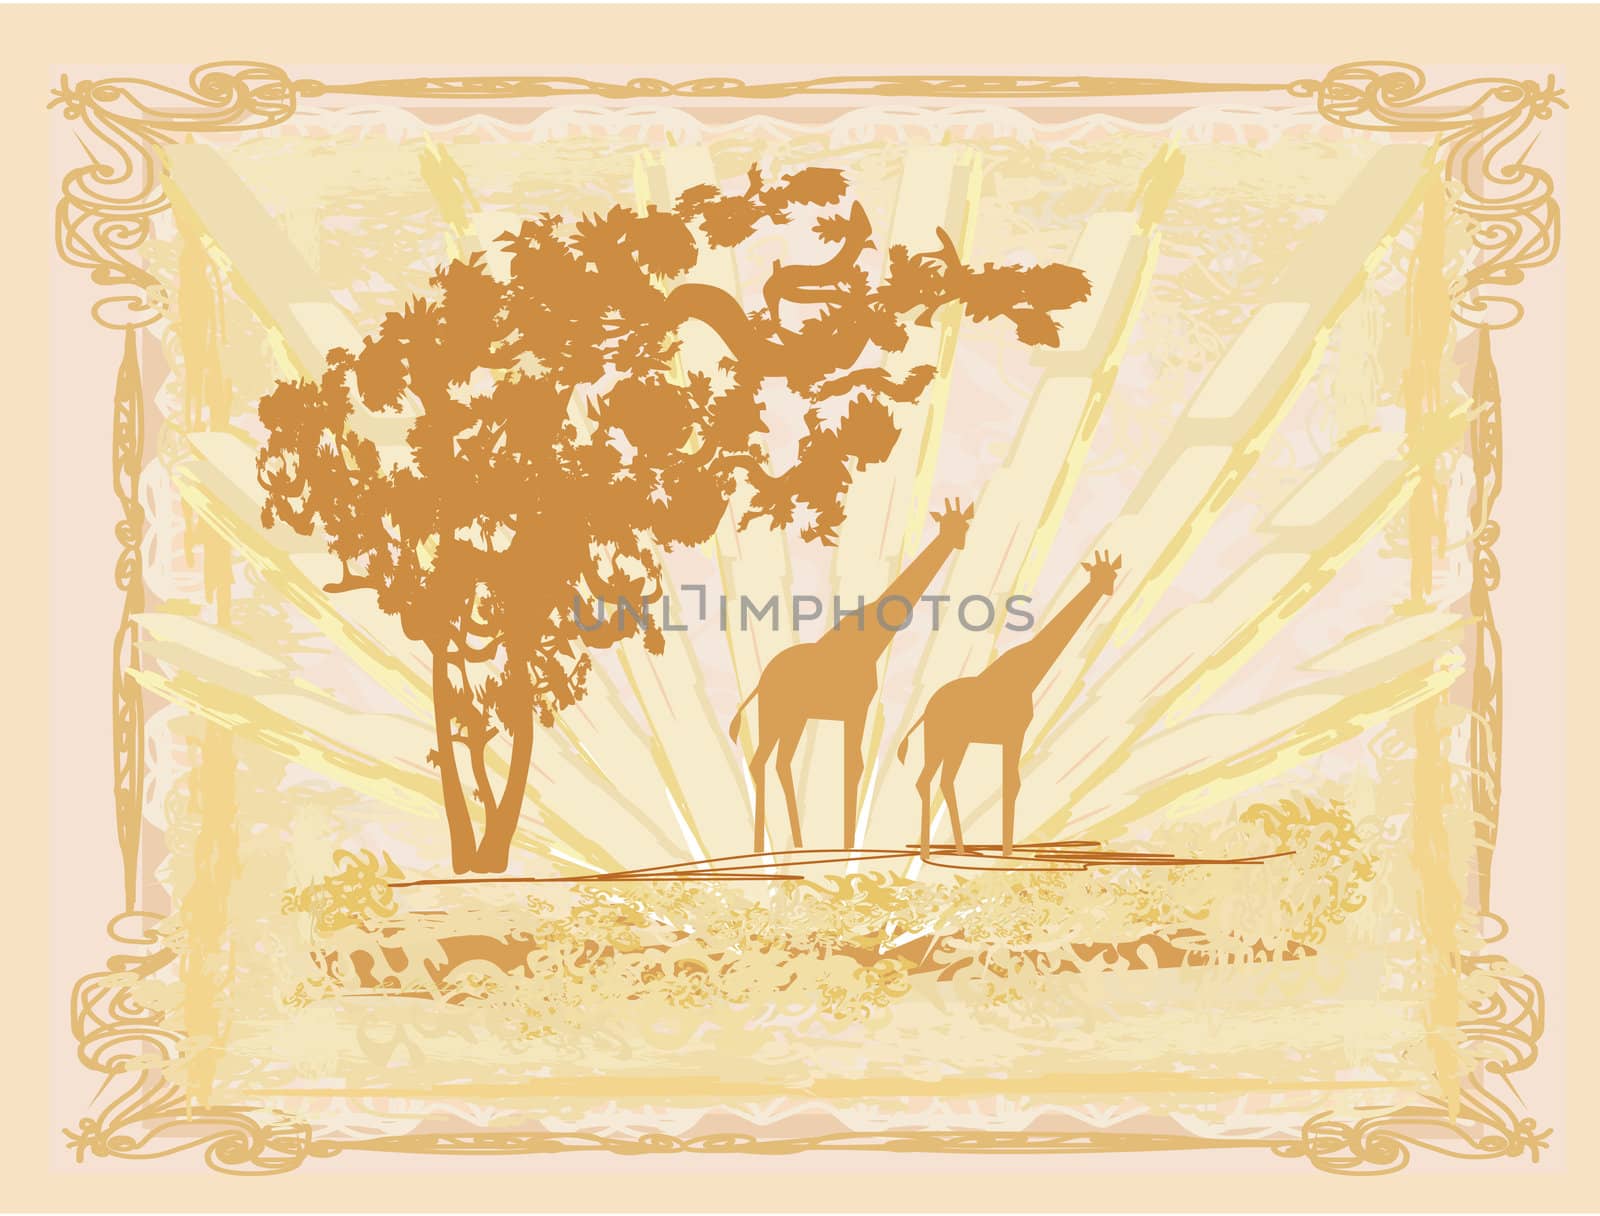 grunge background with African fauna and flora by JackyBrown